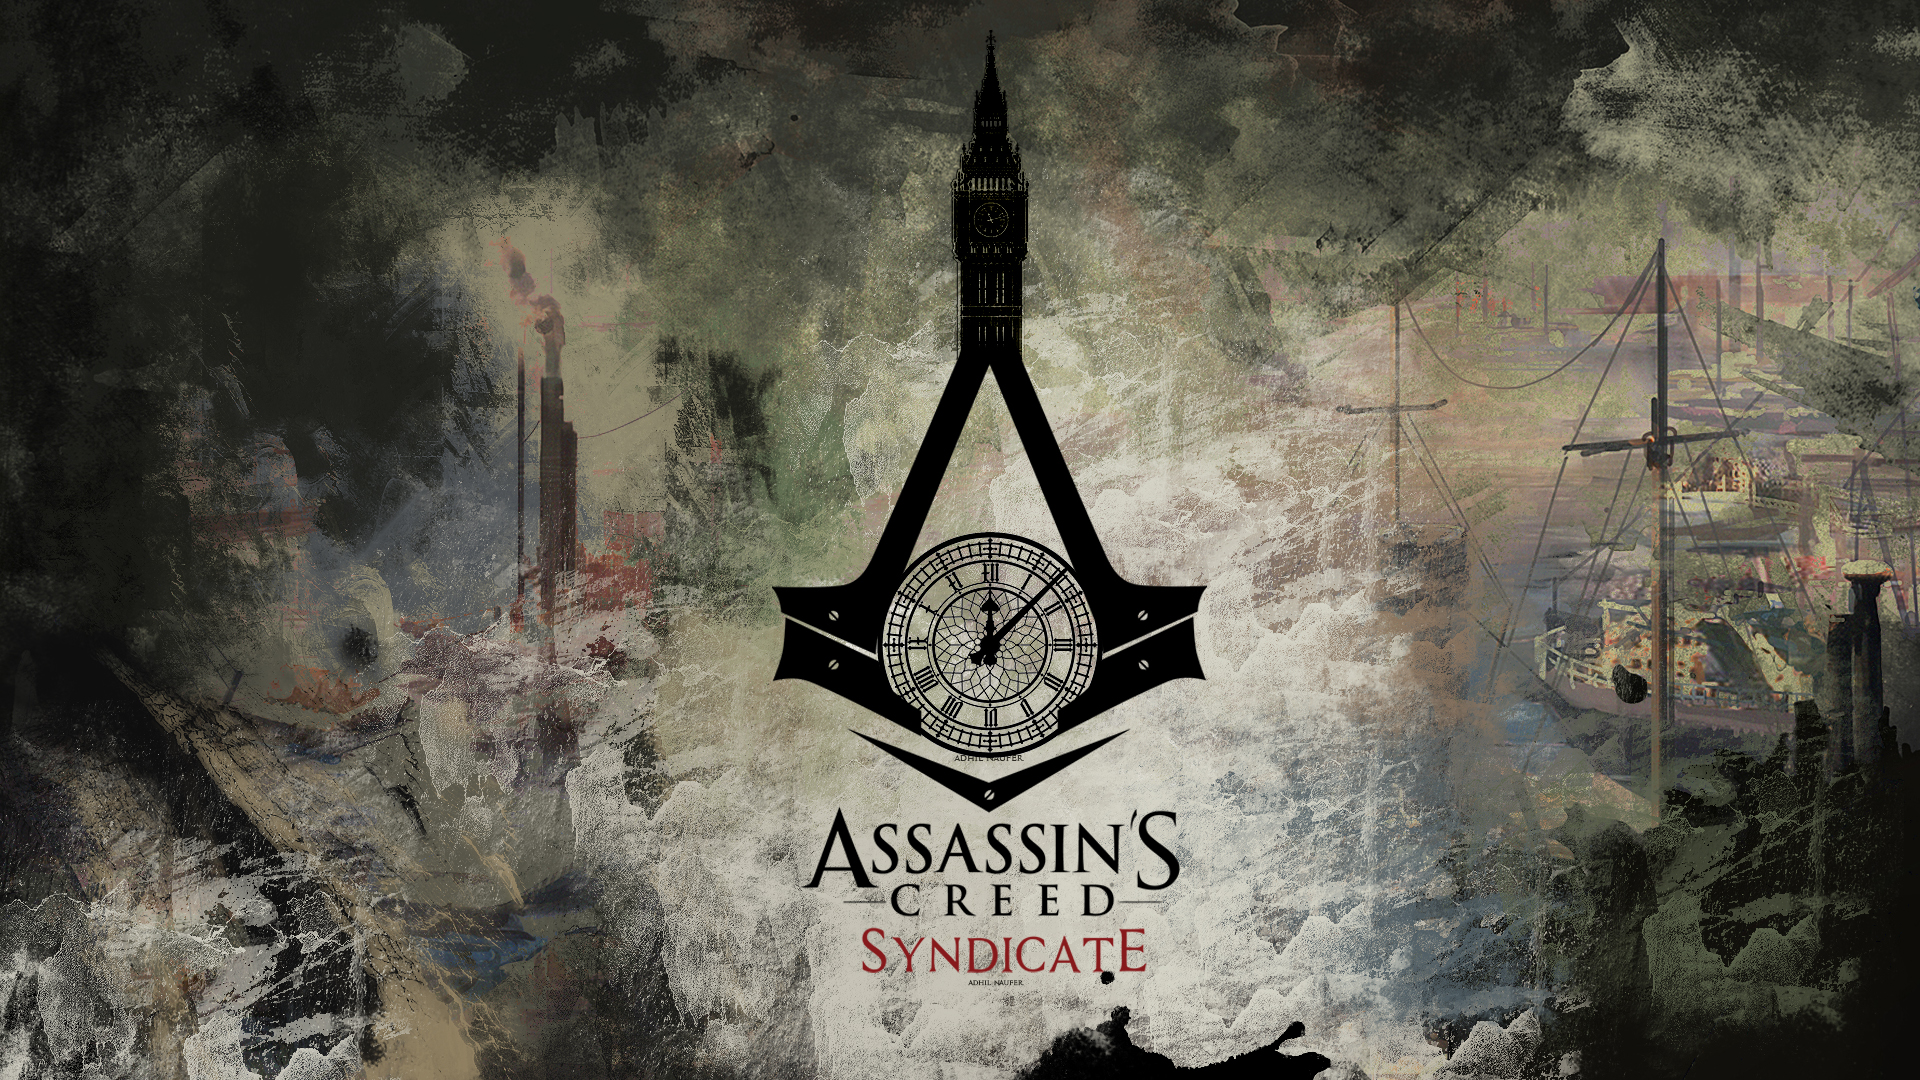 assassin's creed: syndicate, assassin's creed, video game, logo Full HD